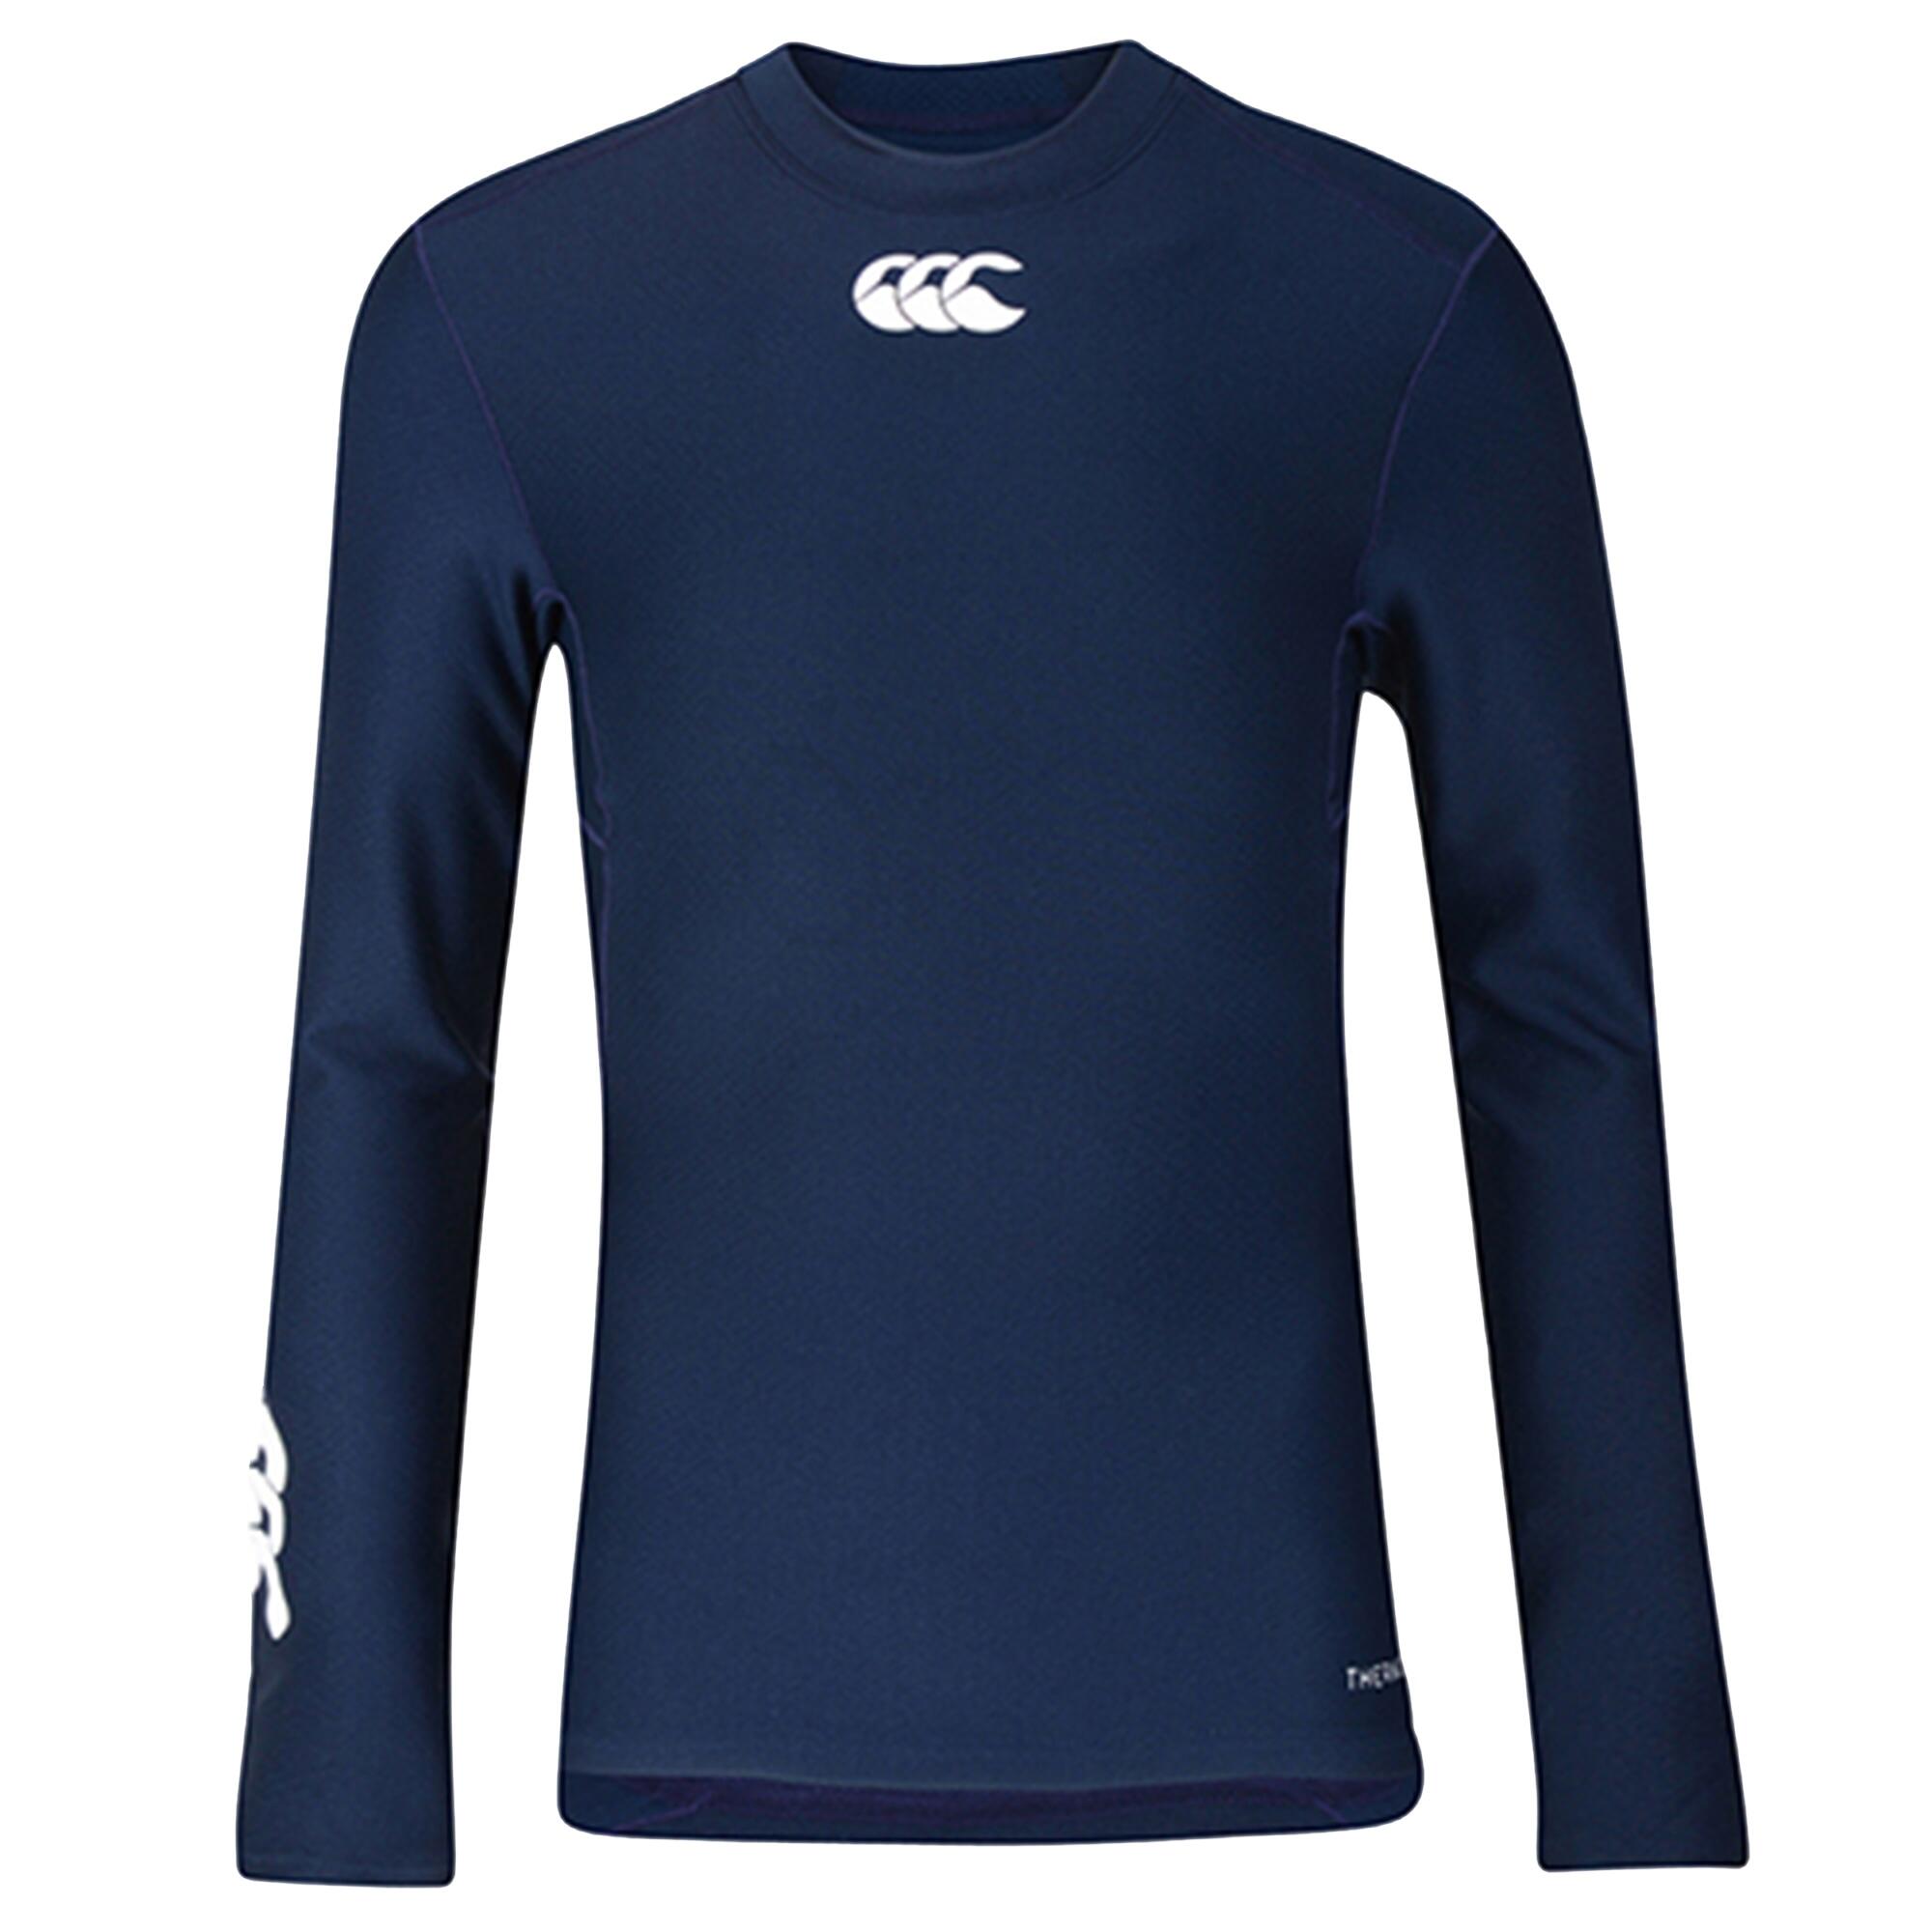 CANTERBURY Childrens/Kids Long Sleeve ThermoReg Base Layer Top (Navy)